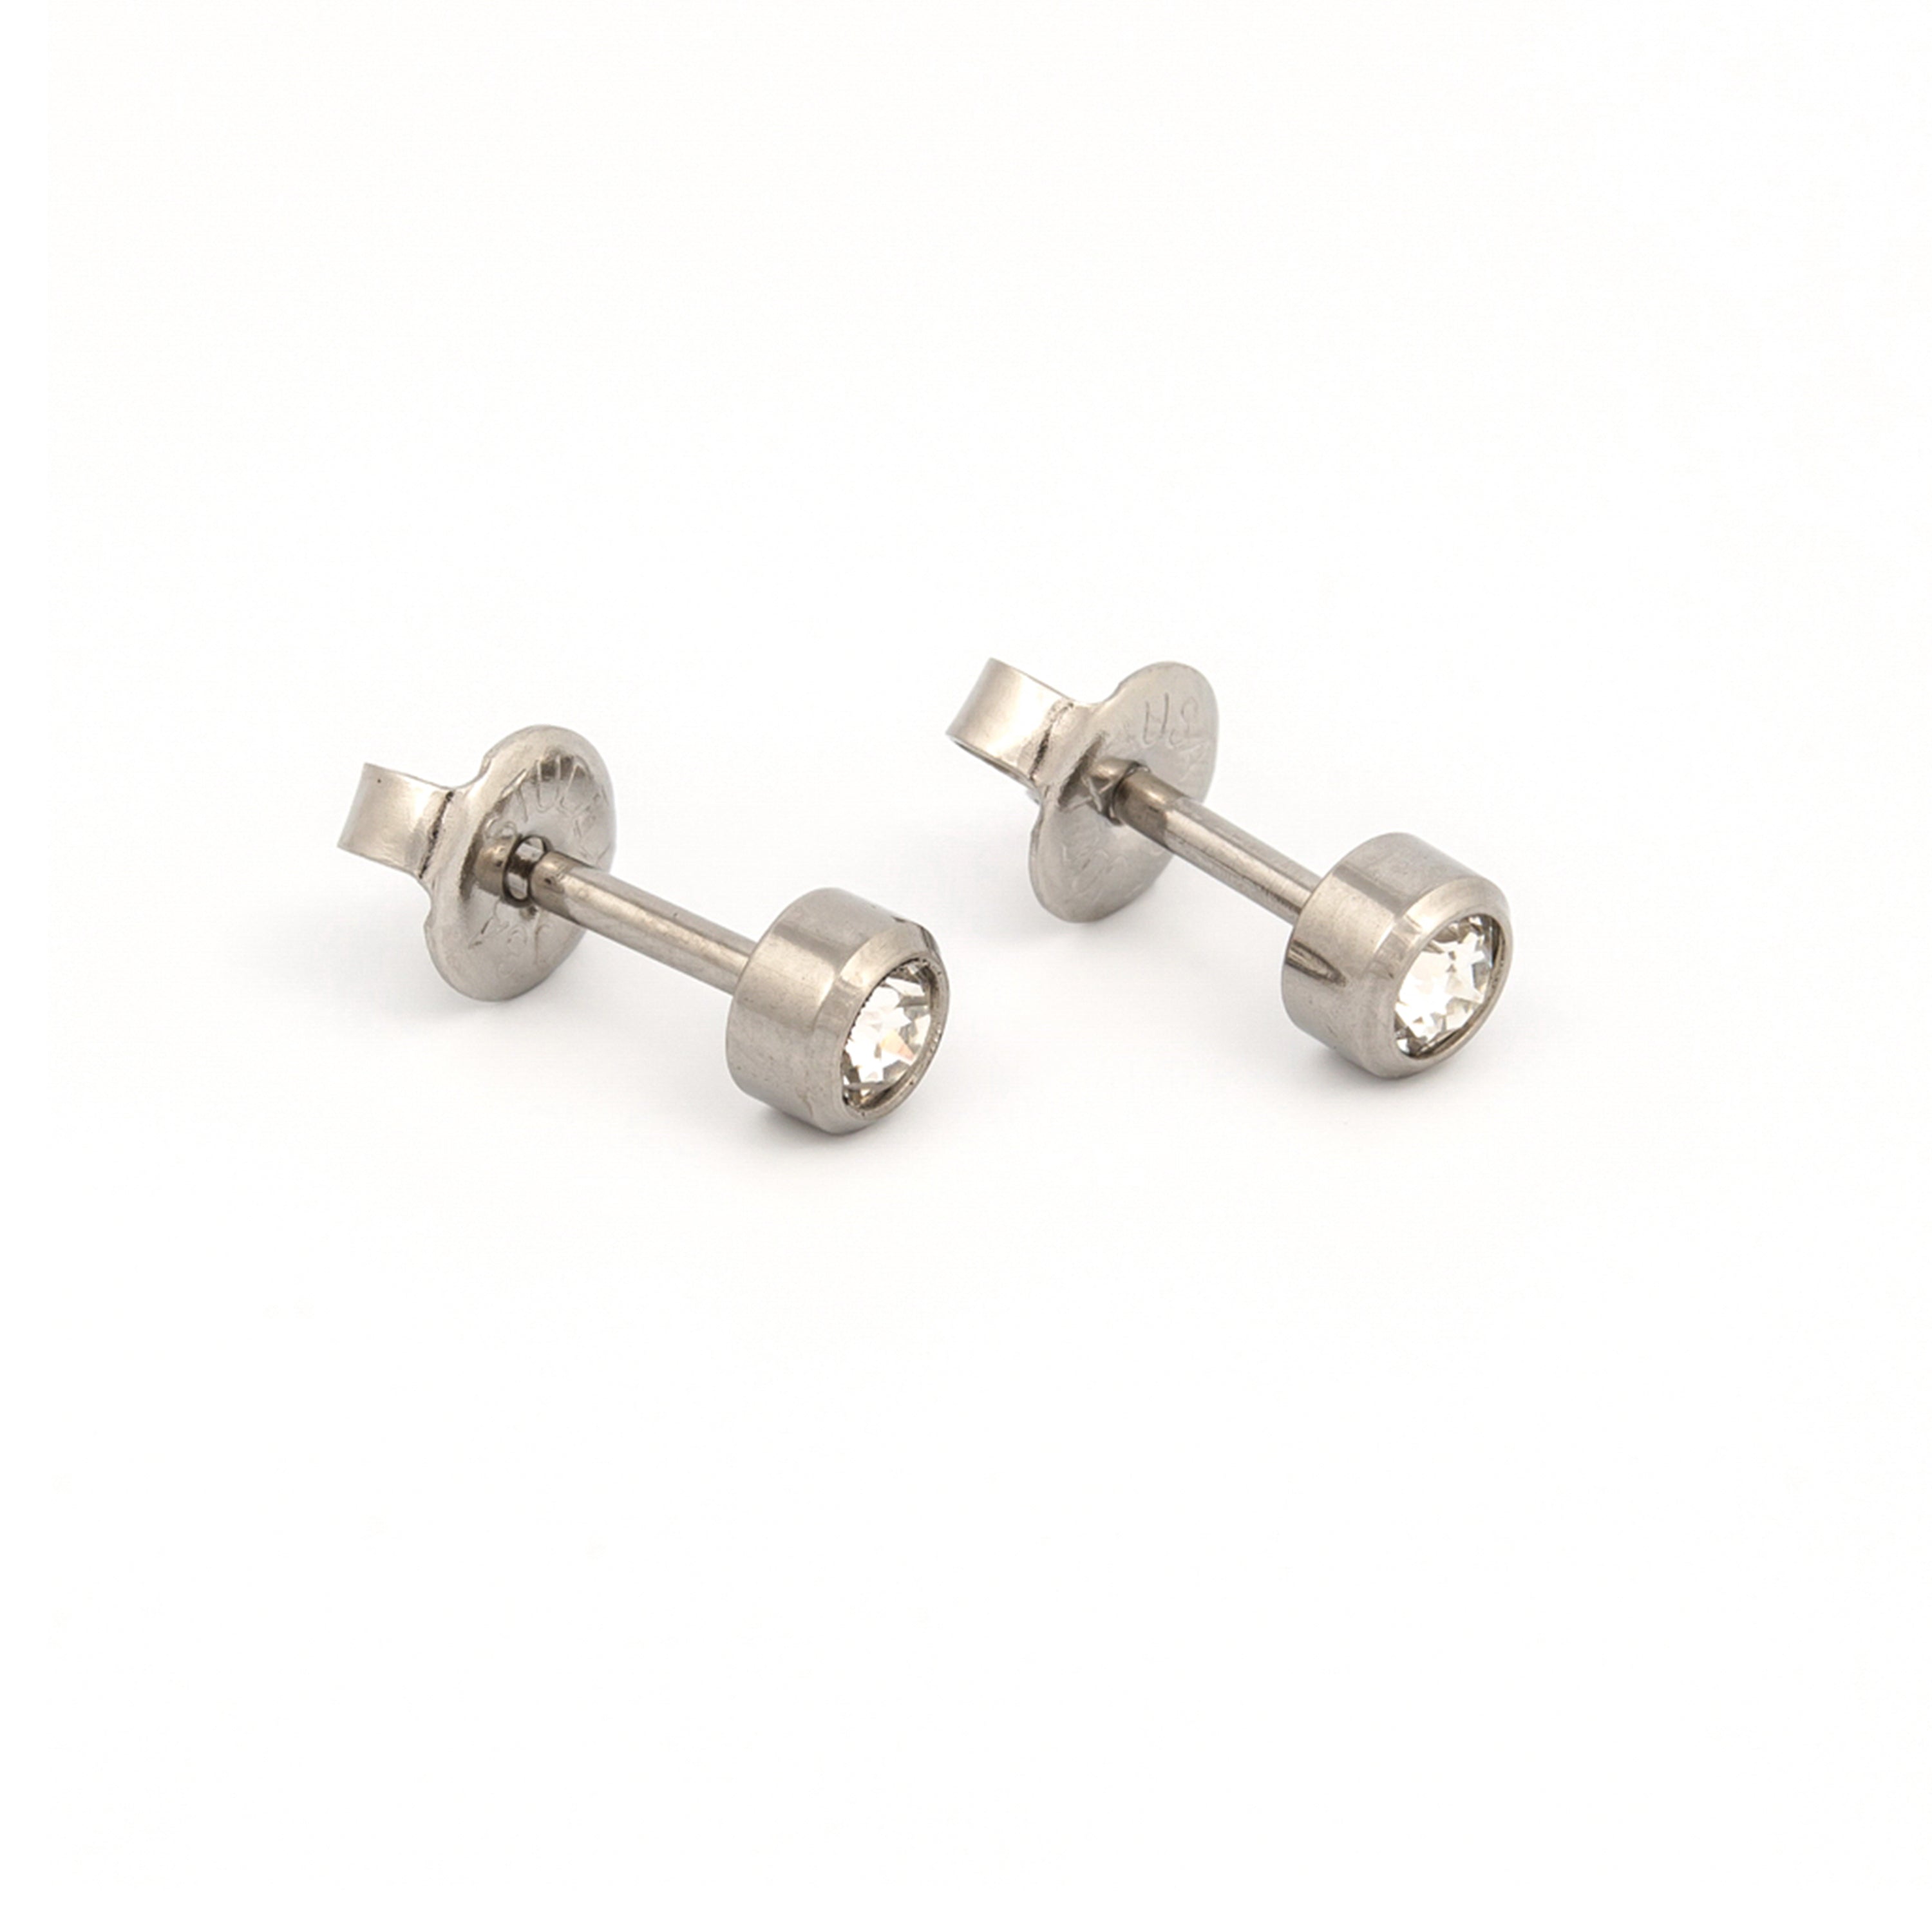 3MM April – Crystal Bezel Allergy free Stainless Steel Ear Studs | MADE IN USA | Ideal for everyday wear